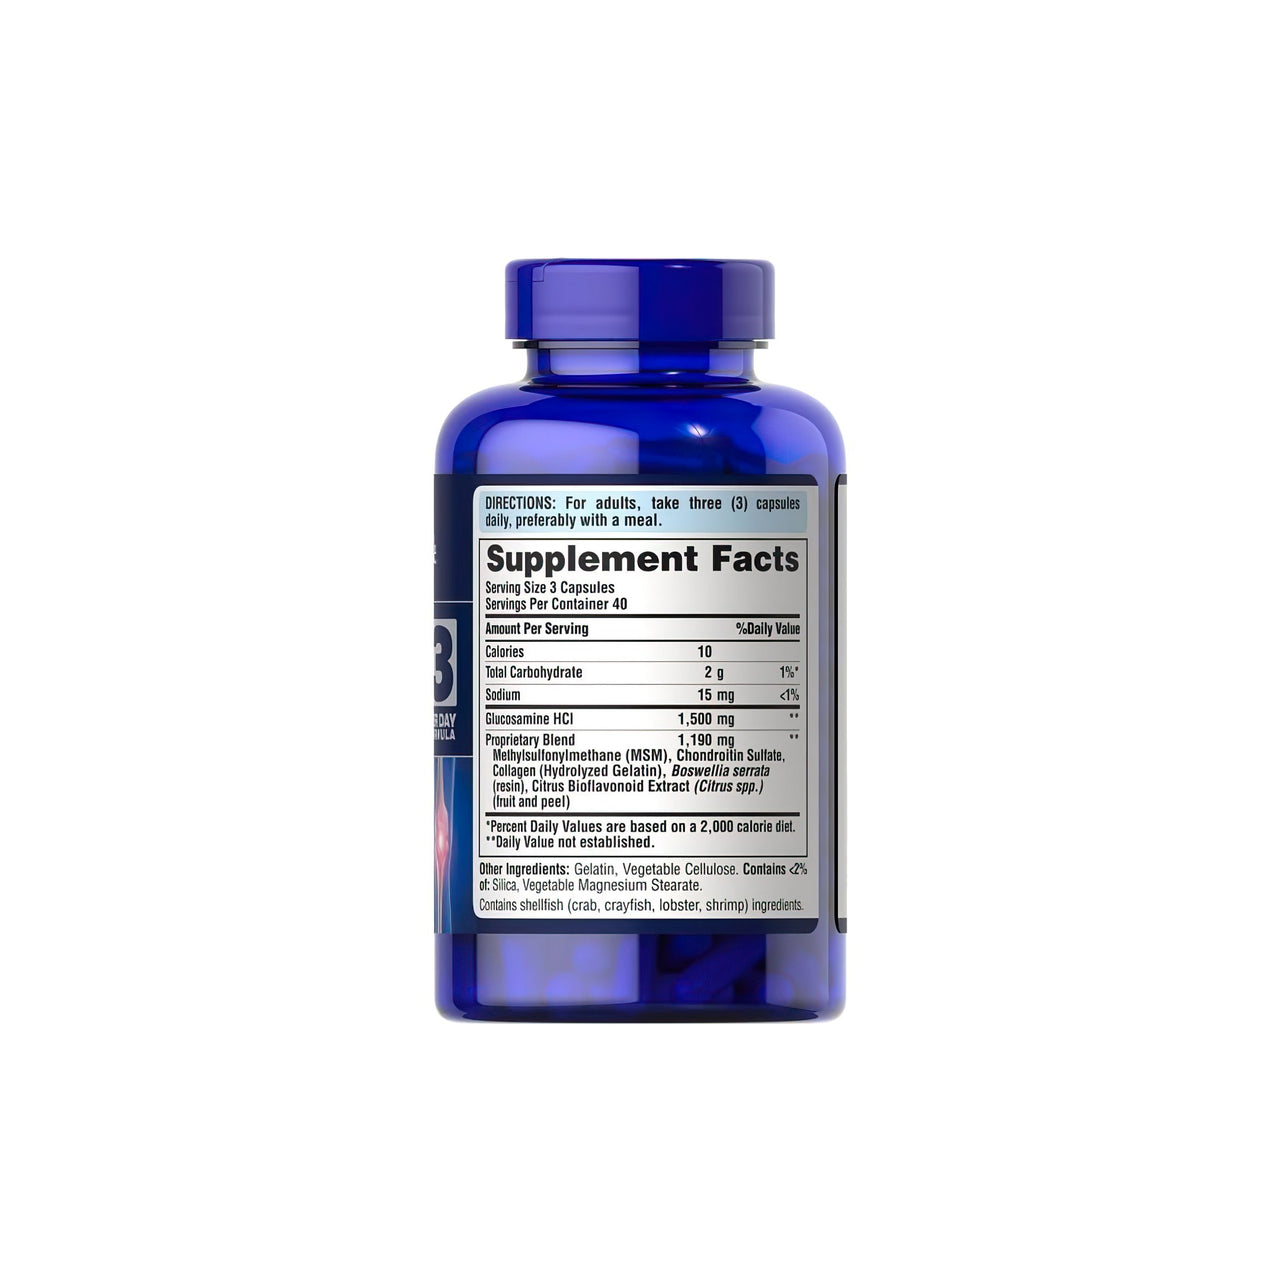 A bottle of Puritan's Pride Glucosamine Chondroitin MSM 120 capsules with a label on it.